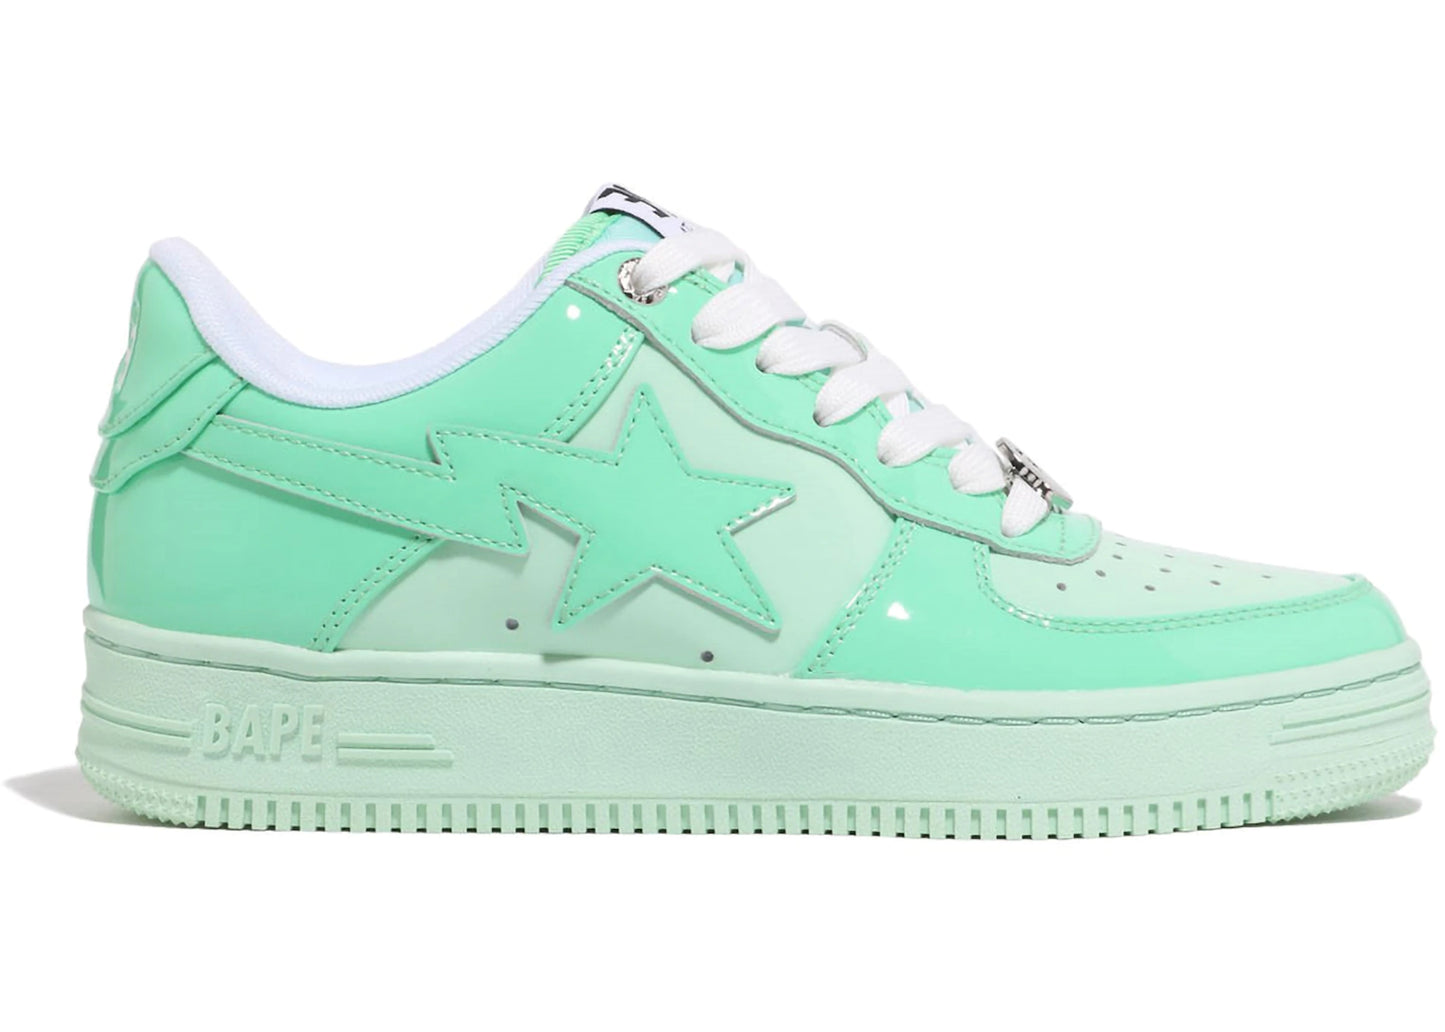 A Bathing Ape Bape Sta Patent Leather Colors Ladies Green